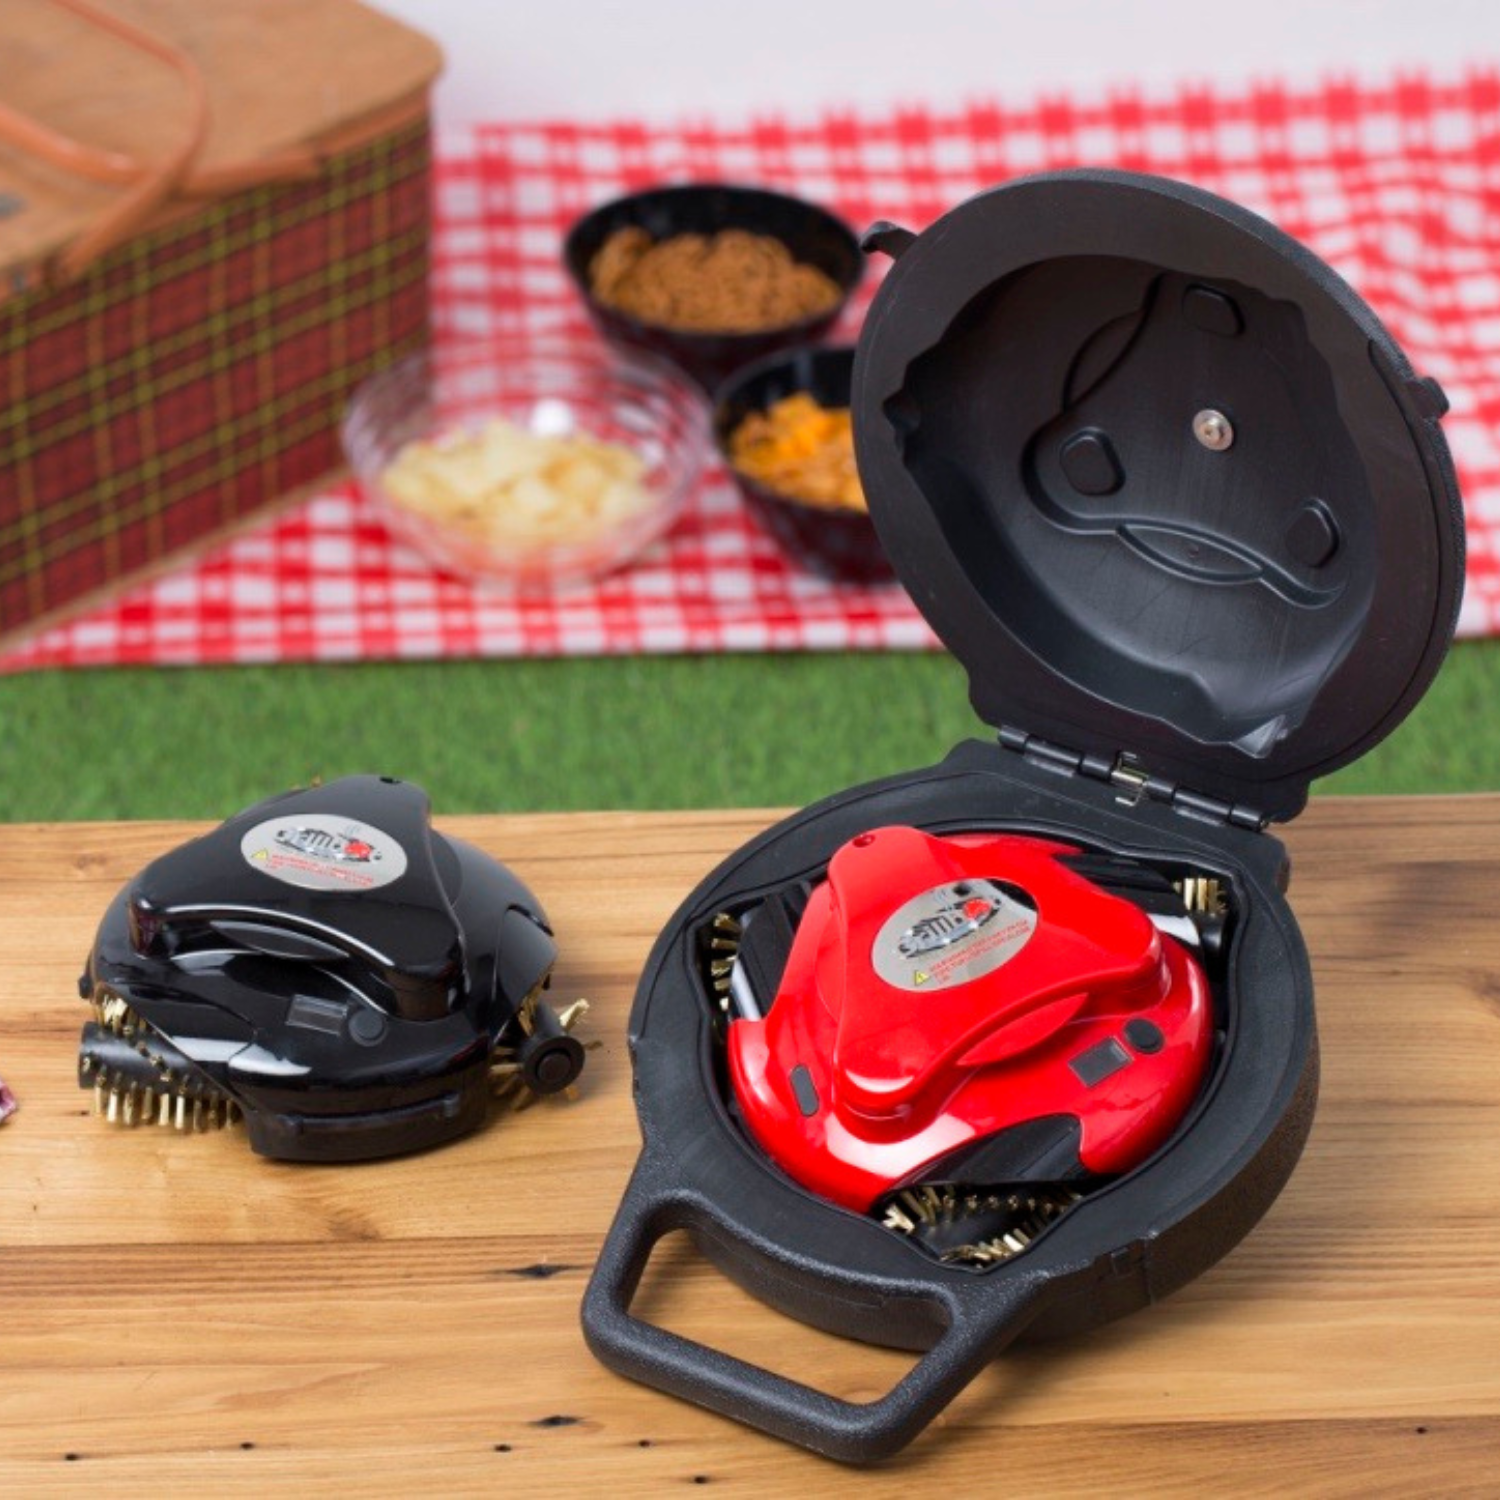 Grillbot Red, Automatic Grill Cleaning Robot